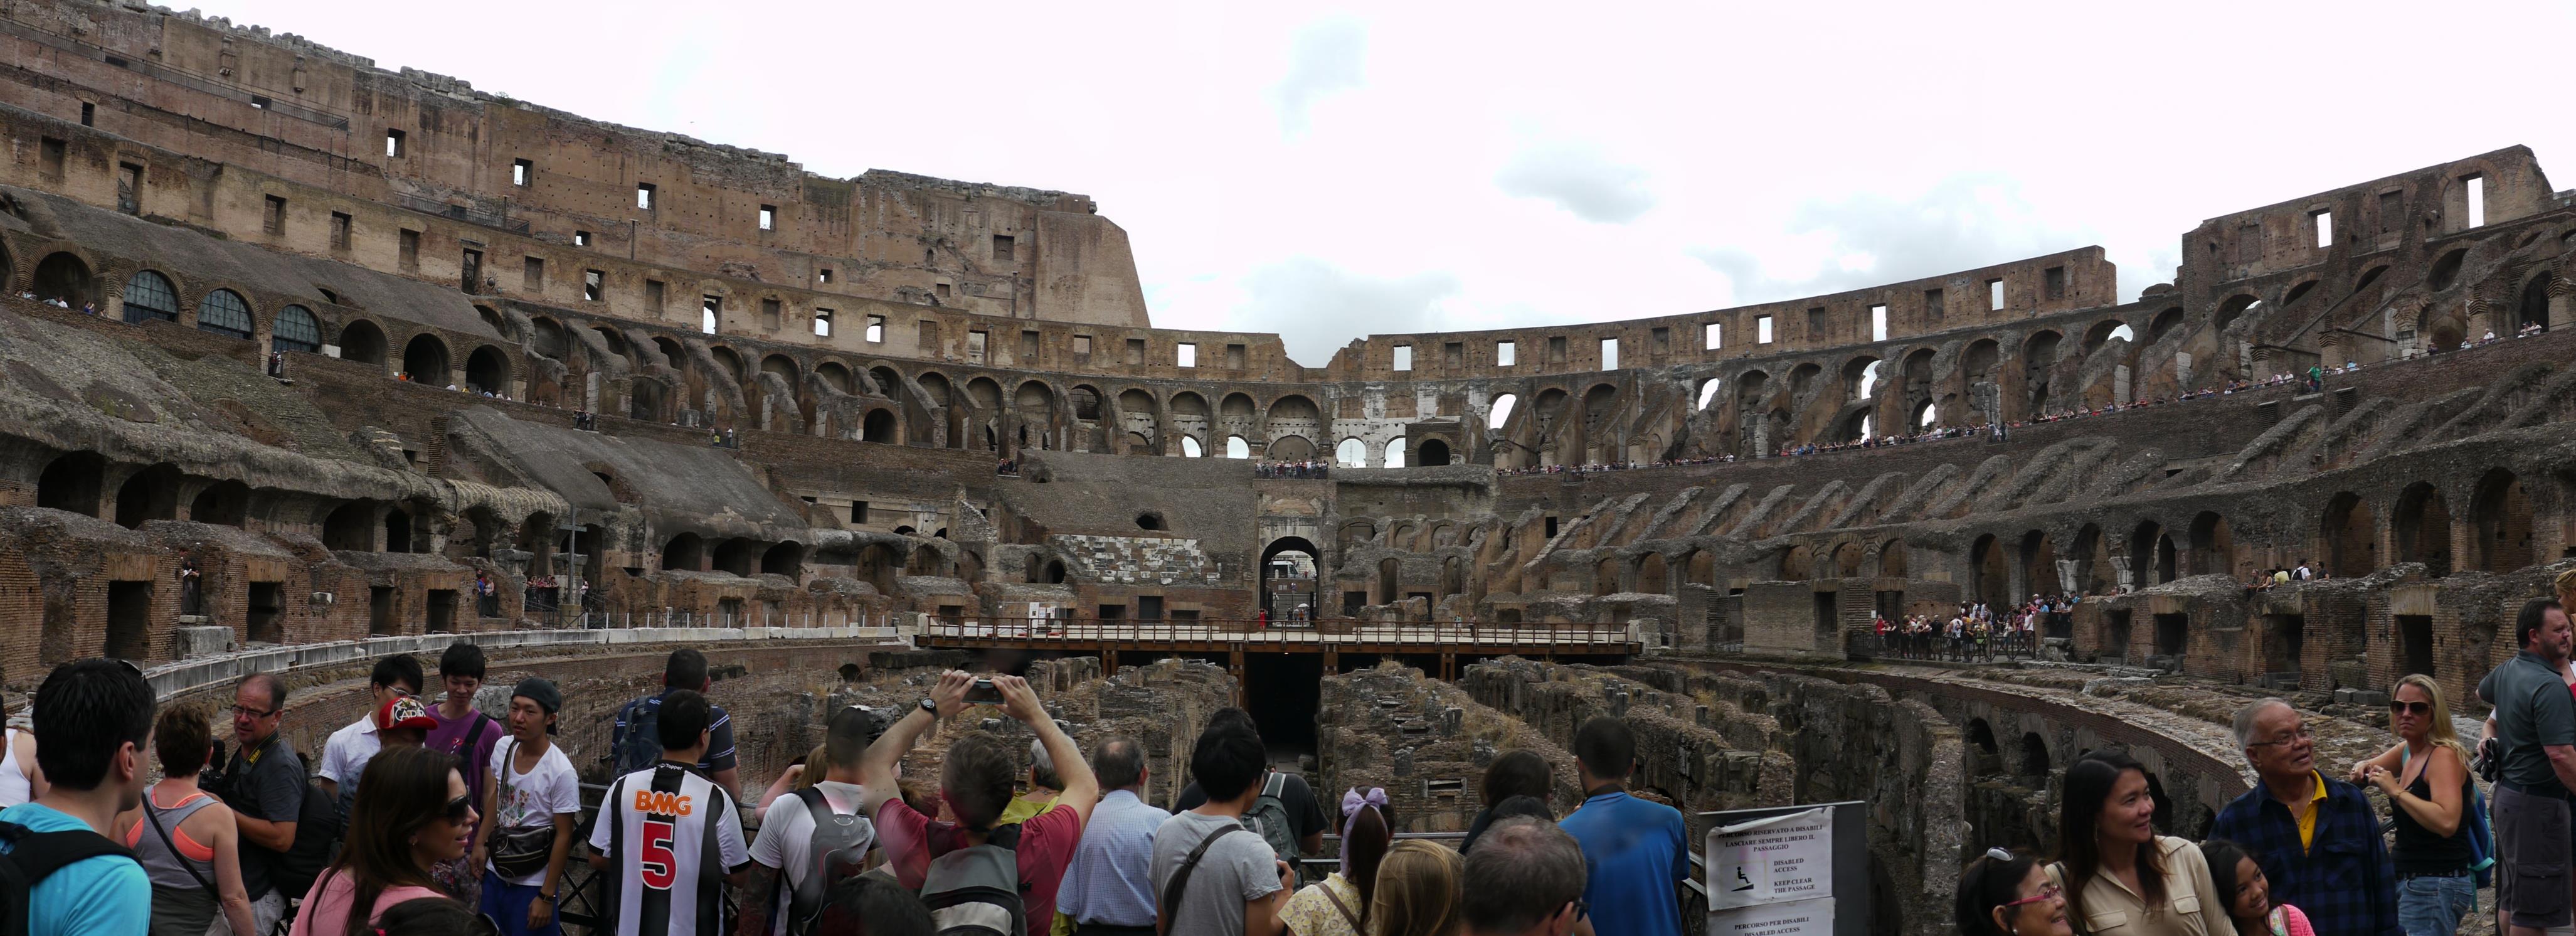 The Colosseum. Still drawing the crowds, nearly 2000 years on